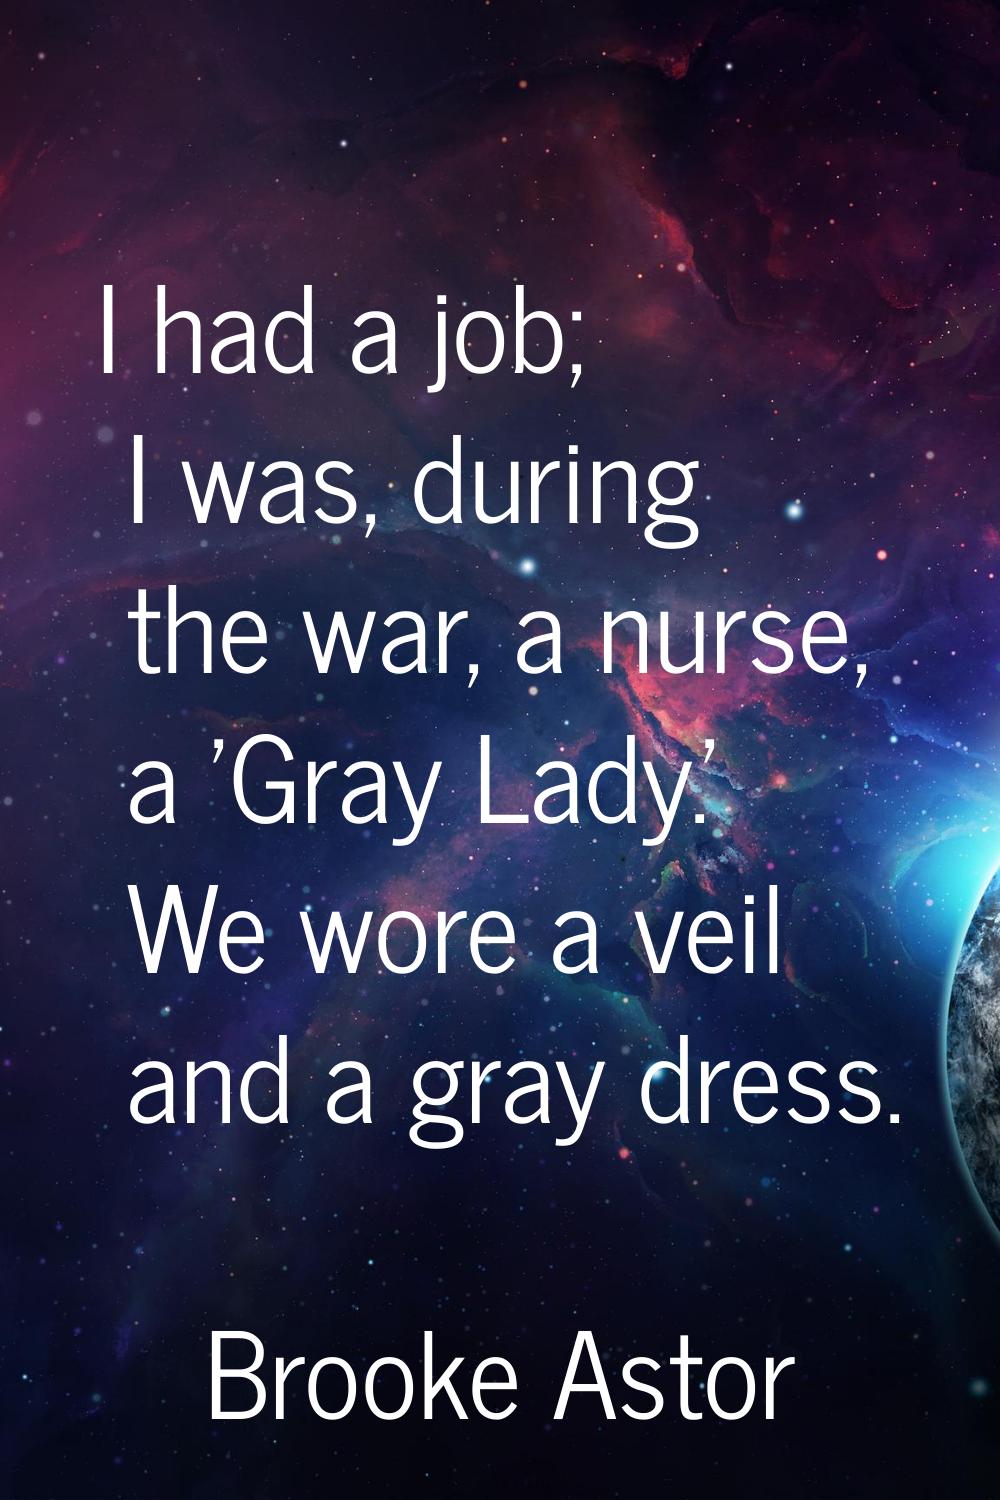 I had a job; I was, during the war, a nurse, a 'Gray Lady.' We wore a veil and a gray dress.